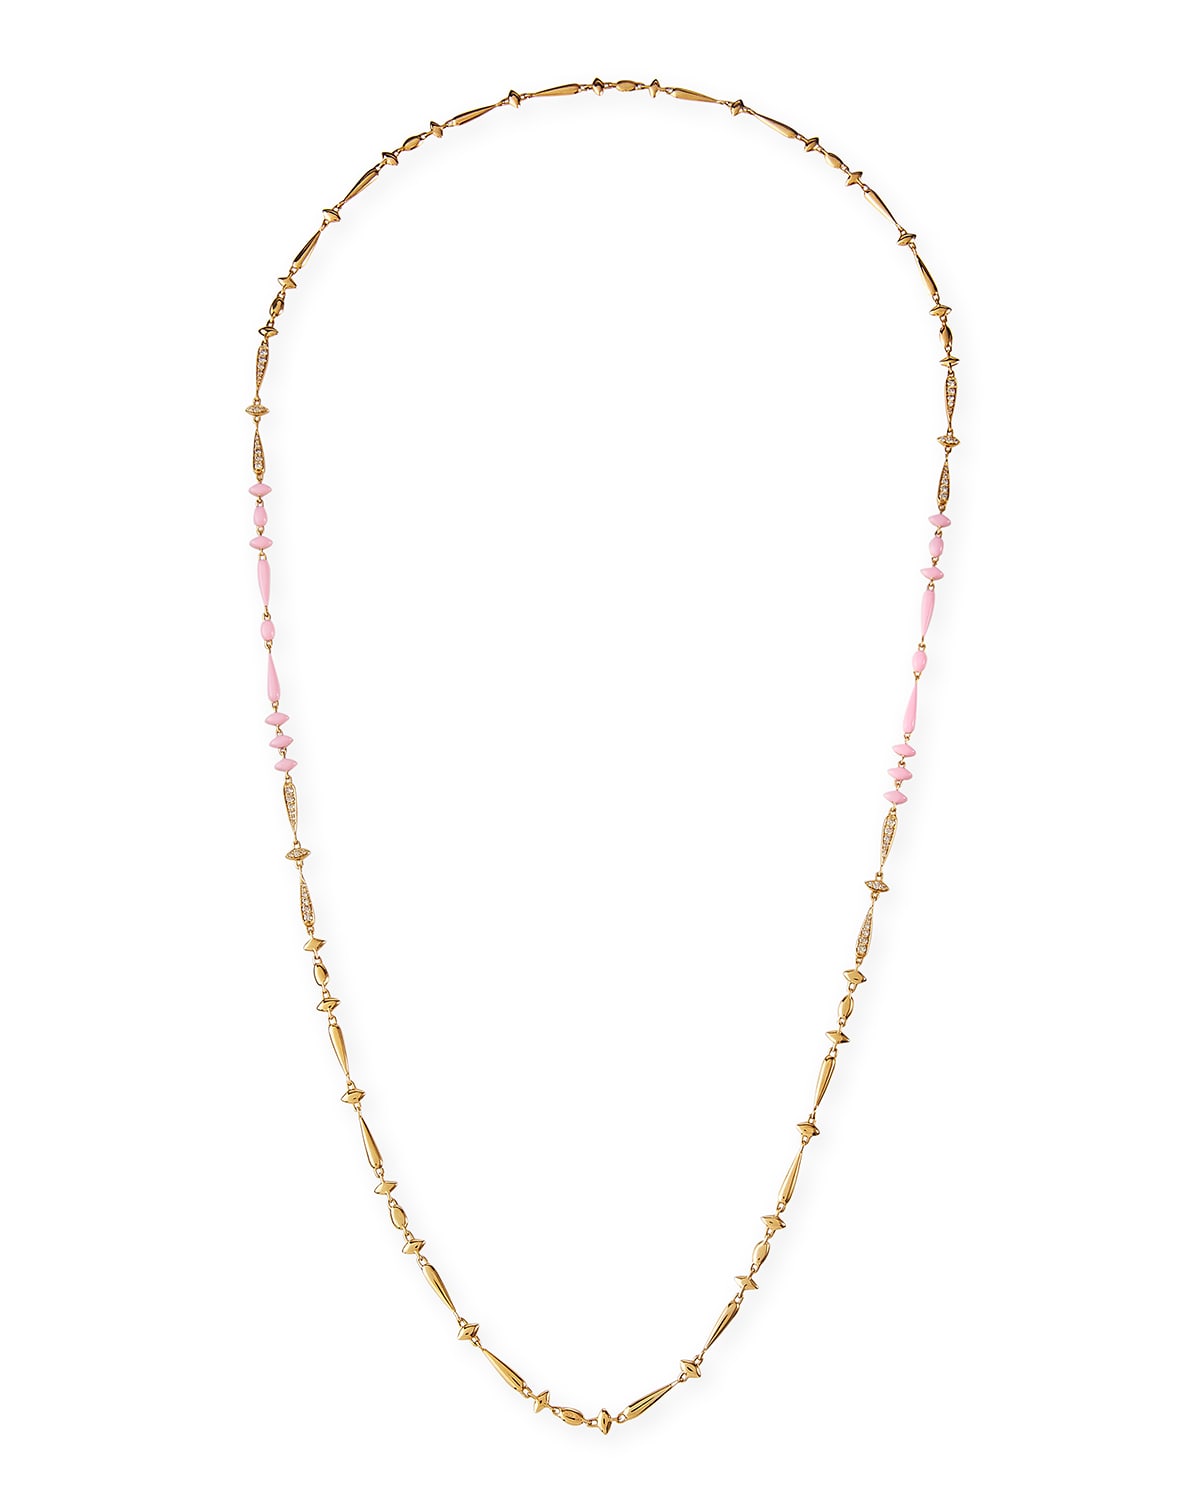 Etho Maria Brown Diamond and Pink Ceramic Necklace